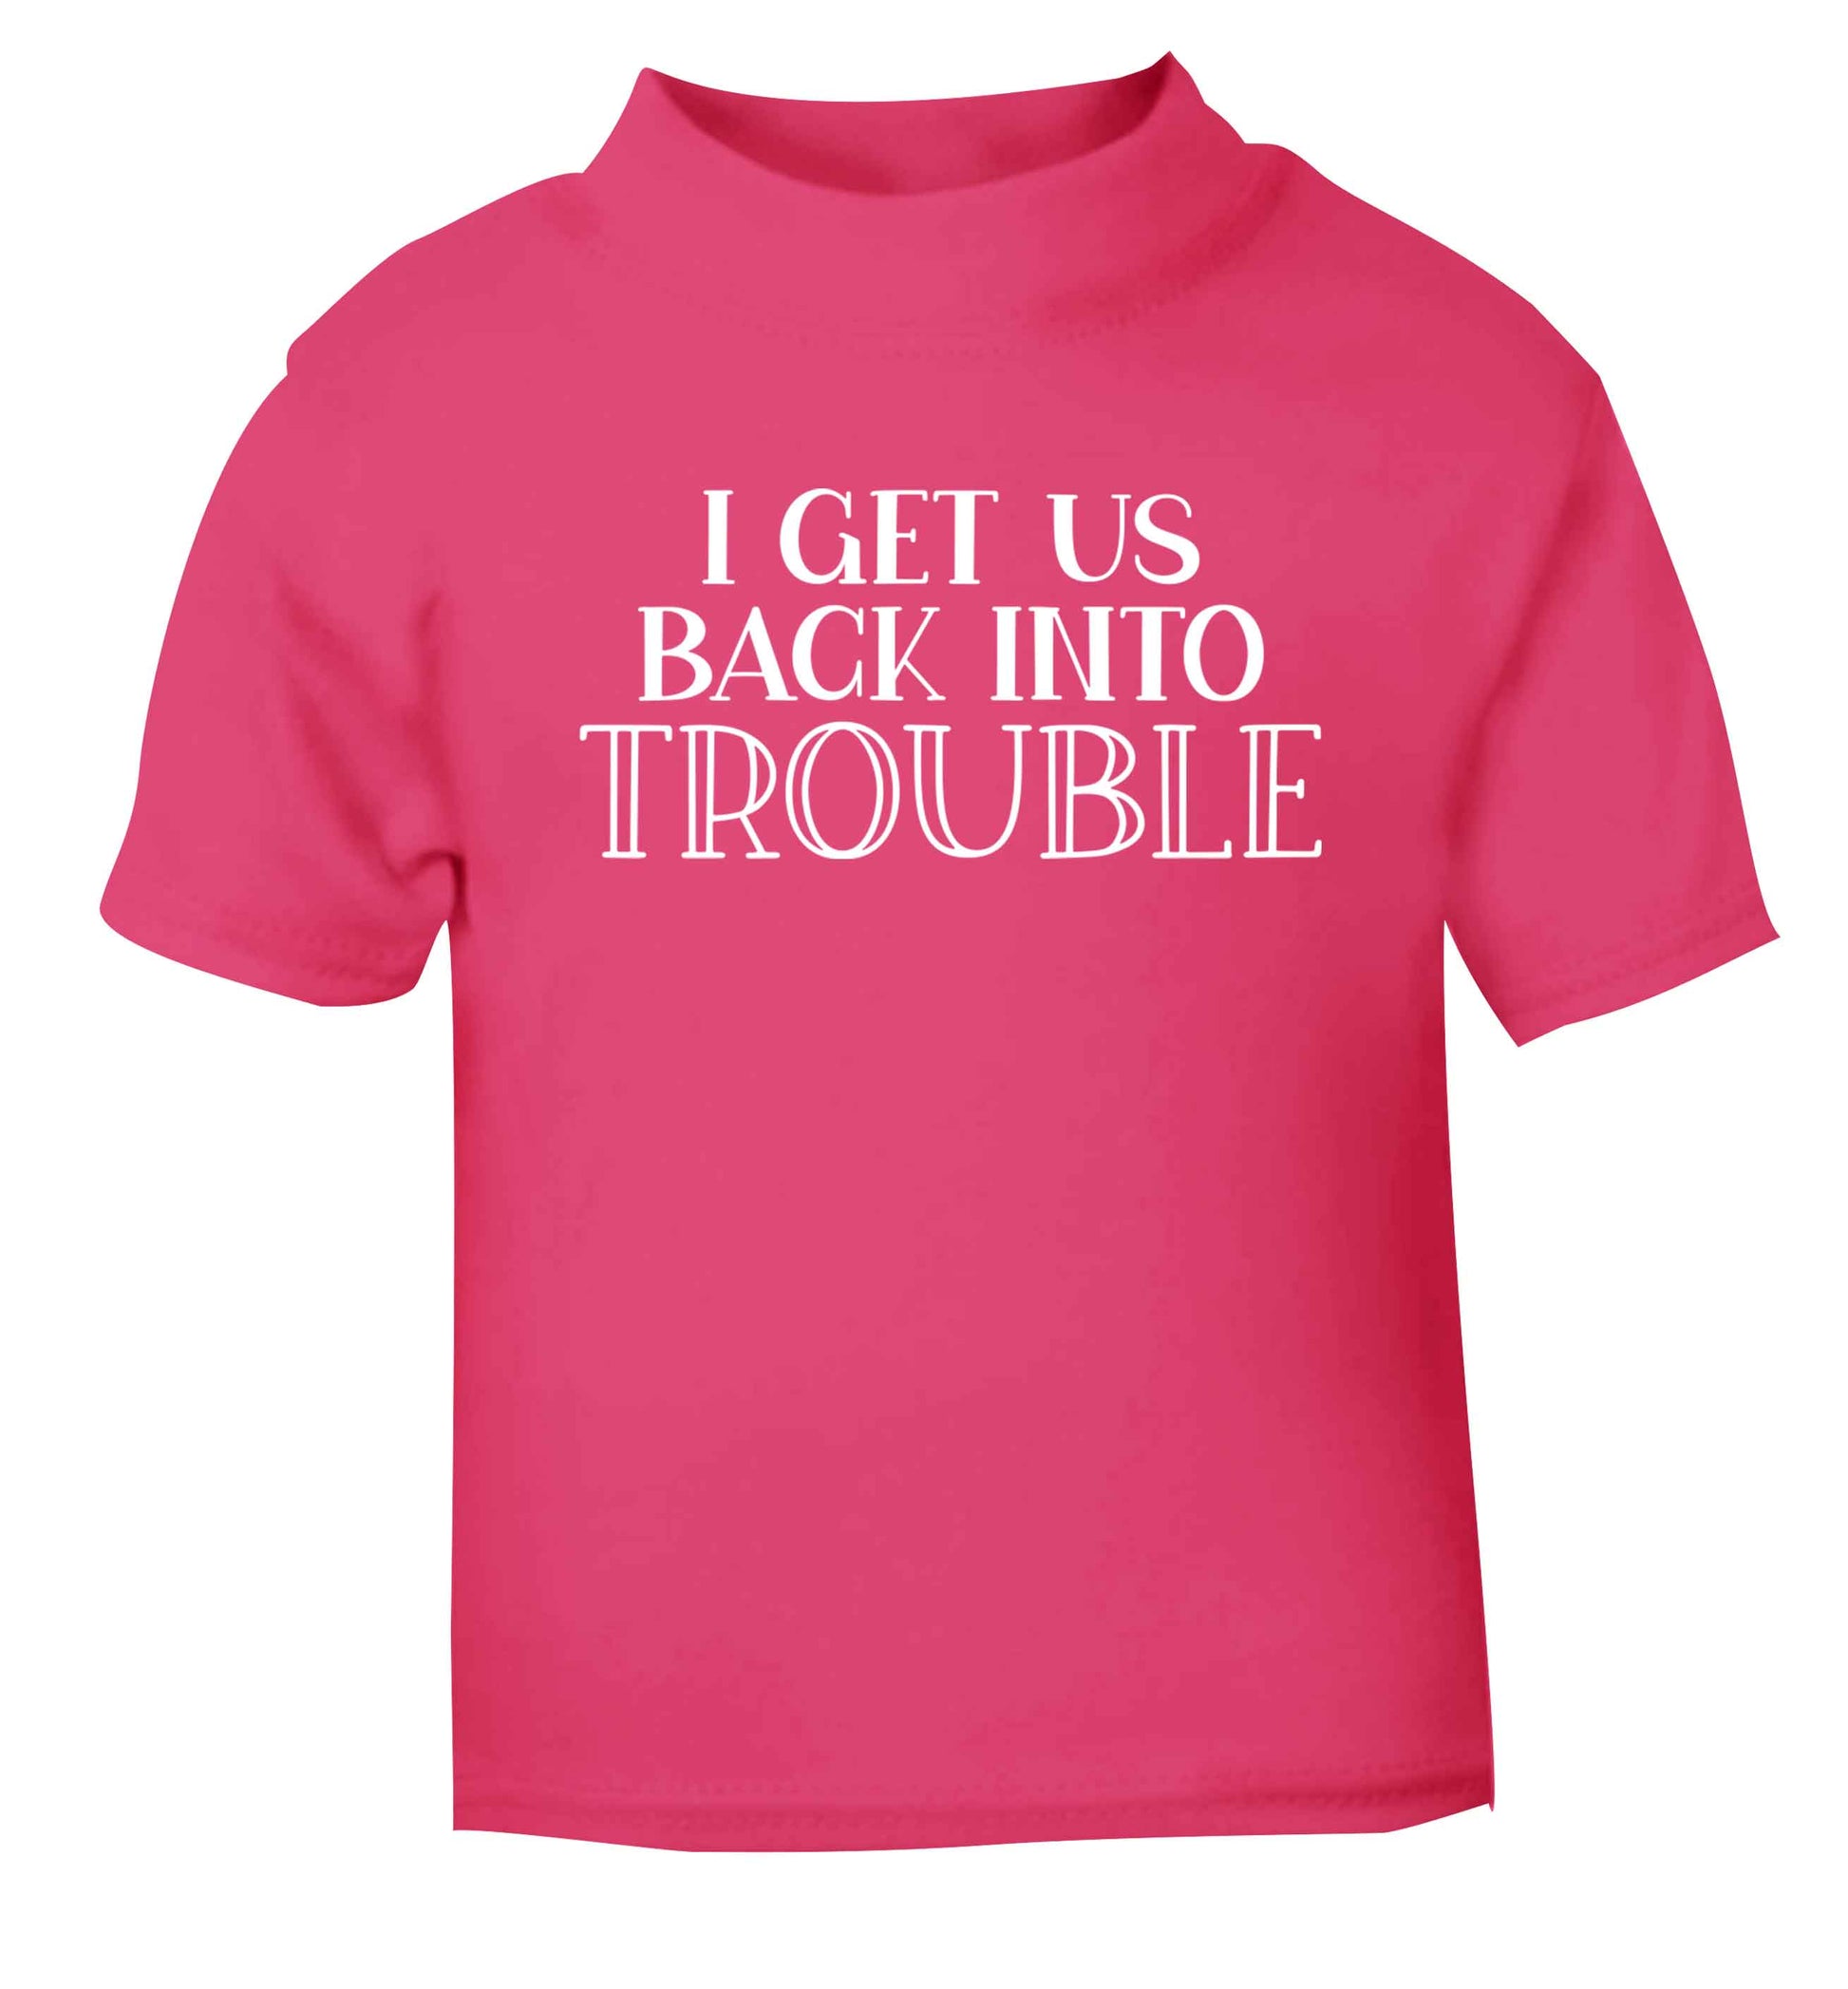 I get us back into trouble pink baby toddler Tshirt 2 Years